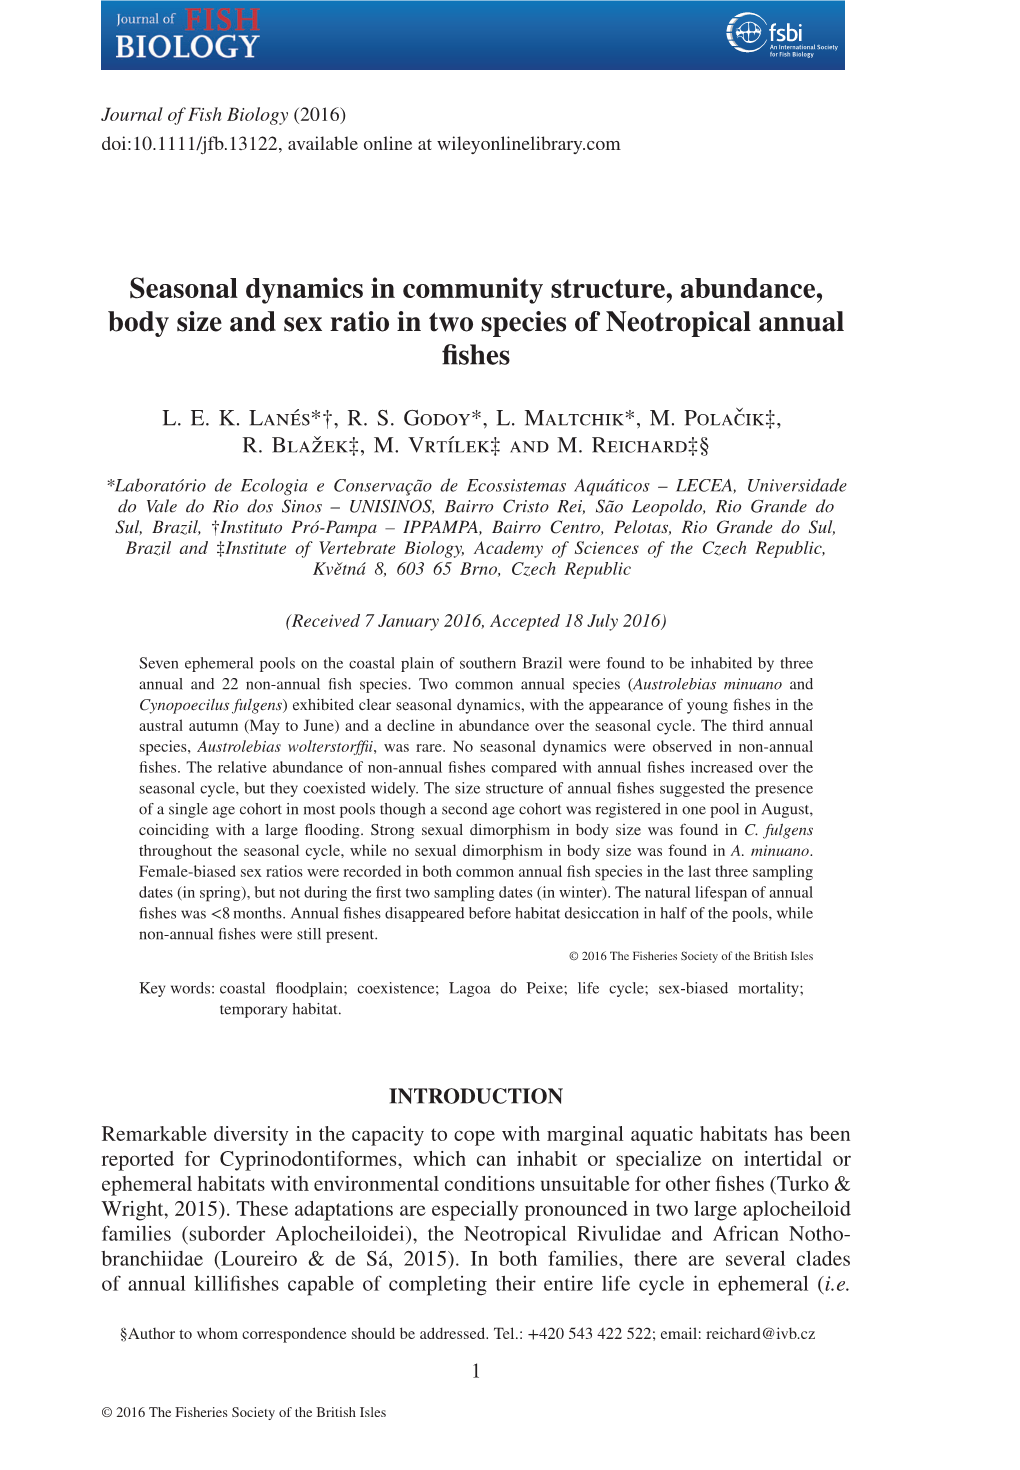 Seasonal Dynamics in Community Structure, Abundance, Body Size and Sex Ratio in Two Species of Neotropical Annual Fishes